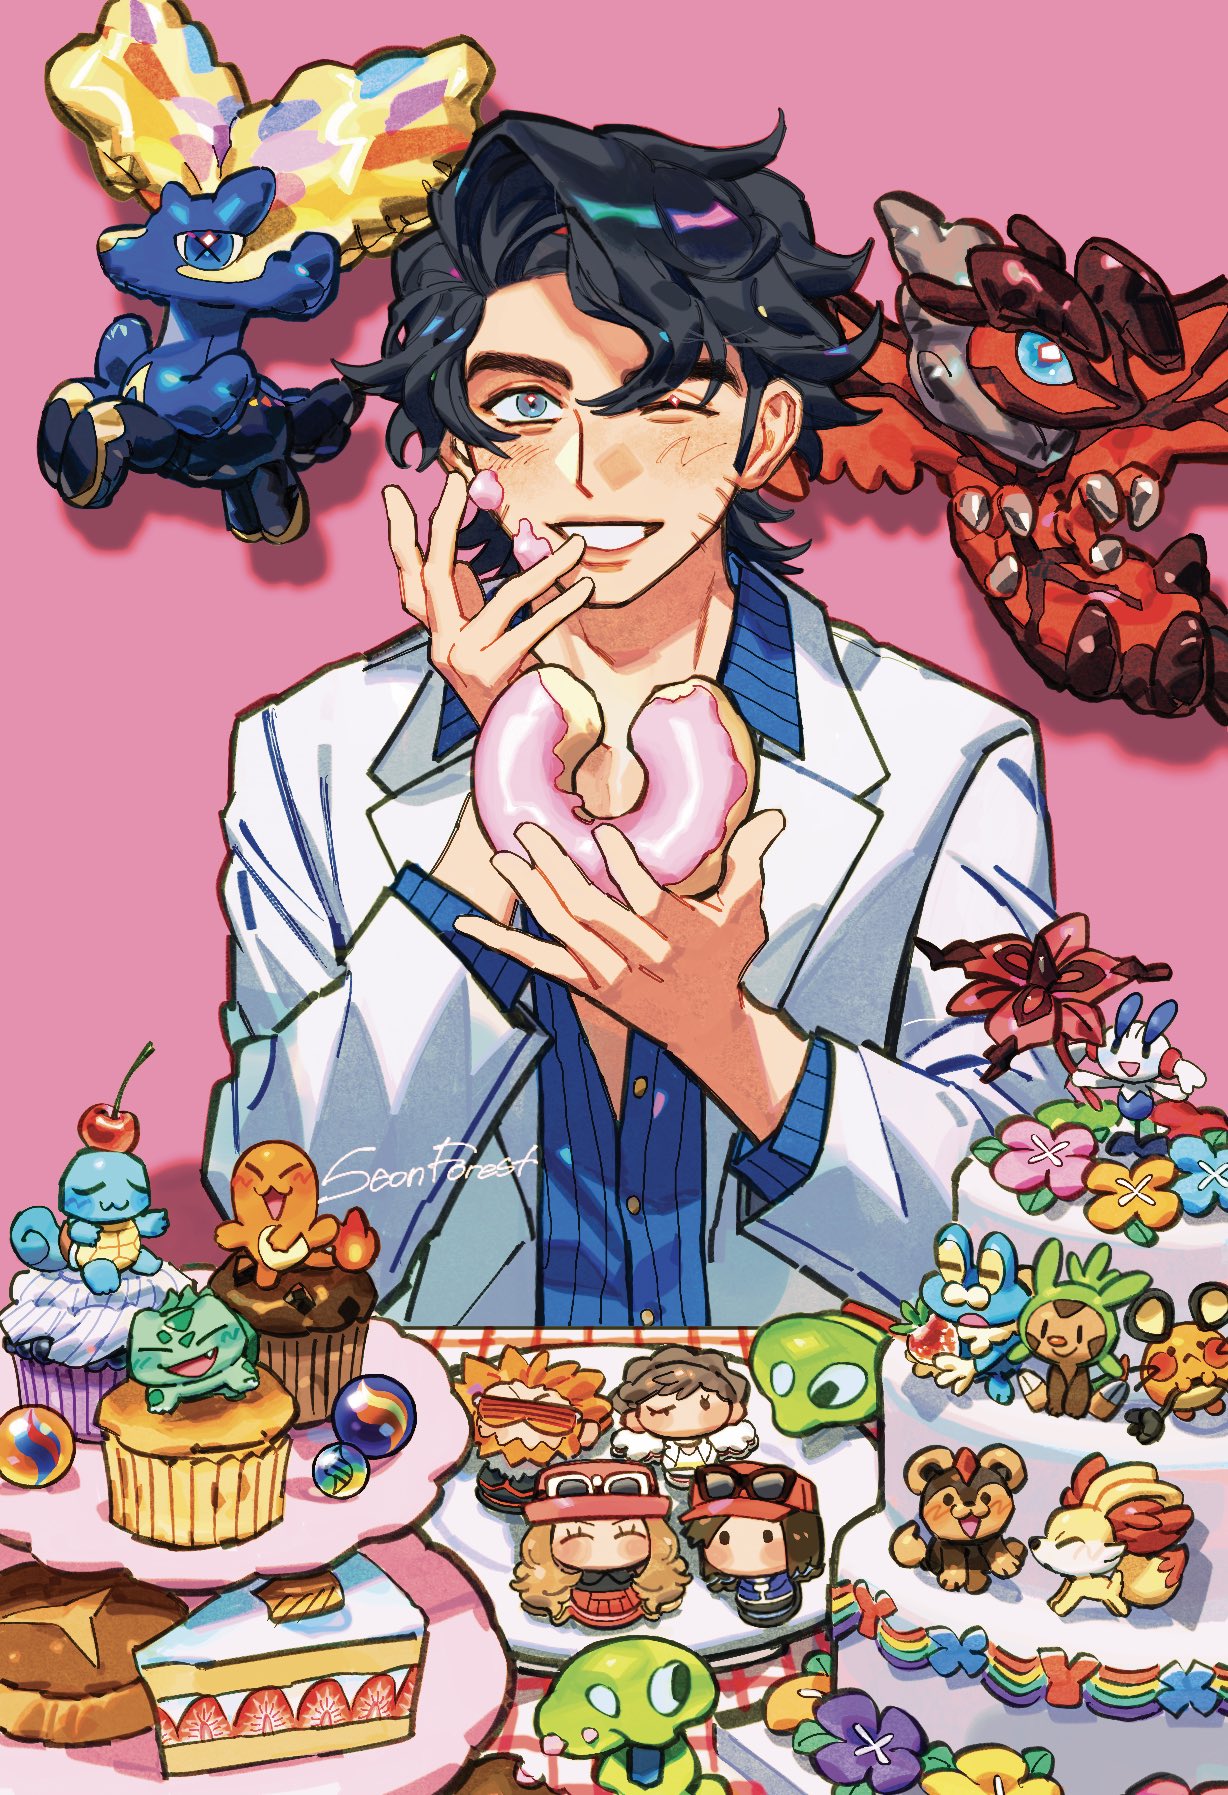 1boy artist_name augustine_sycamore black_hair bulbasaur buttons cake calem_(pokemon) character_cookie charmander cherry chespin commentary_request cookie copyright_name cupcake dedenne diantha_(pokemon) doughnut fennekin floette floette_(eternal) food froakie fruit highres holding holding_food korean_commentary layer_cake litleo lysandre_(pokemon) male_focus mega_stone muffin one_eye_closed pink_background plate pokemon pokemon_xy seonforest serena_(pokemon) short_hair simple_background smile solo squirtle teeth xerneas yveltal zygarde zygarde_core